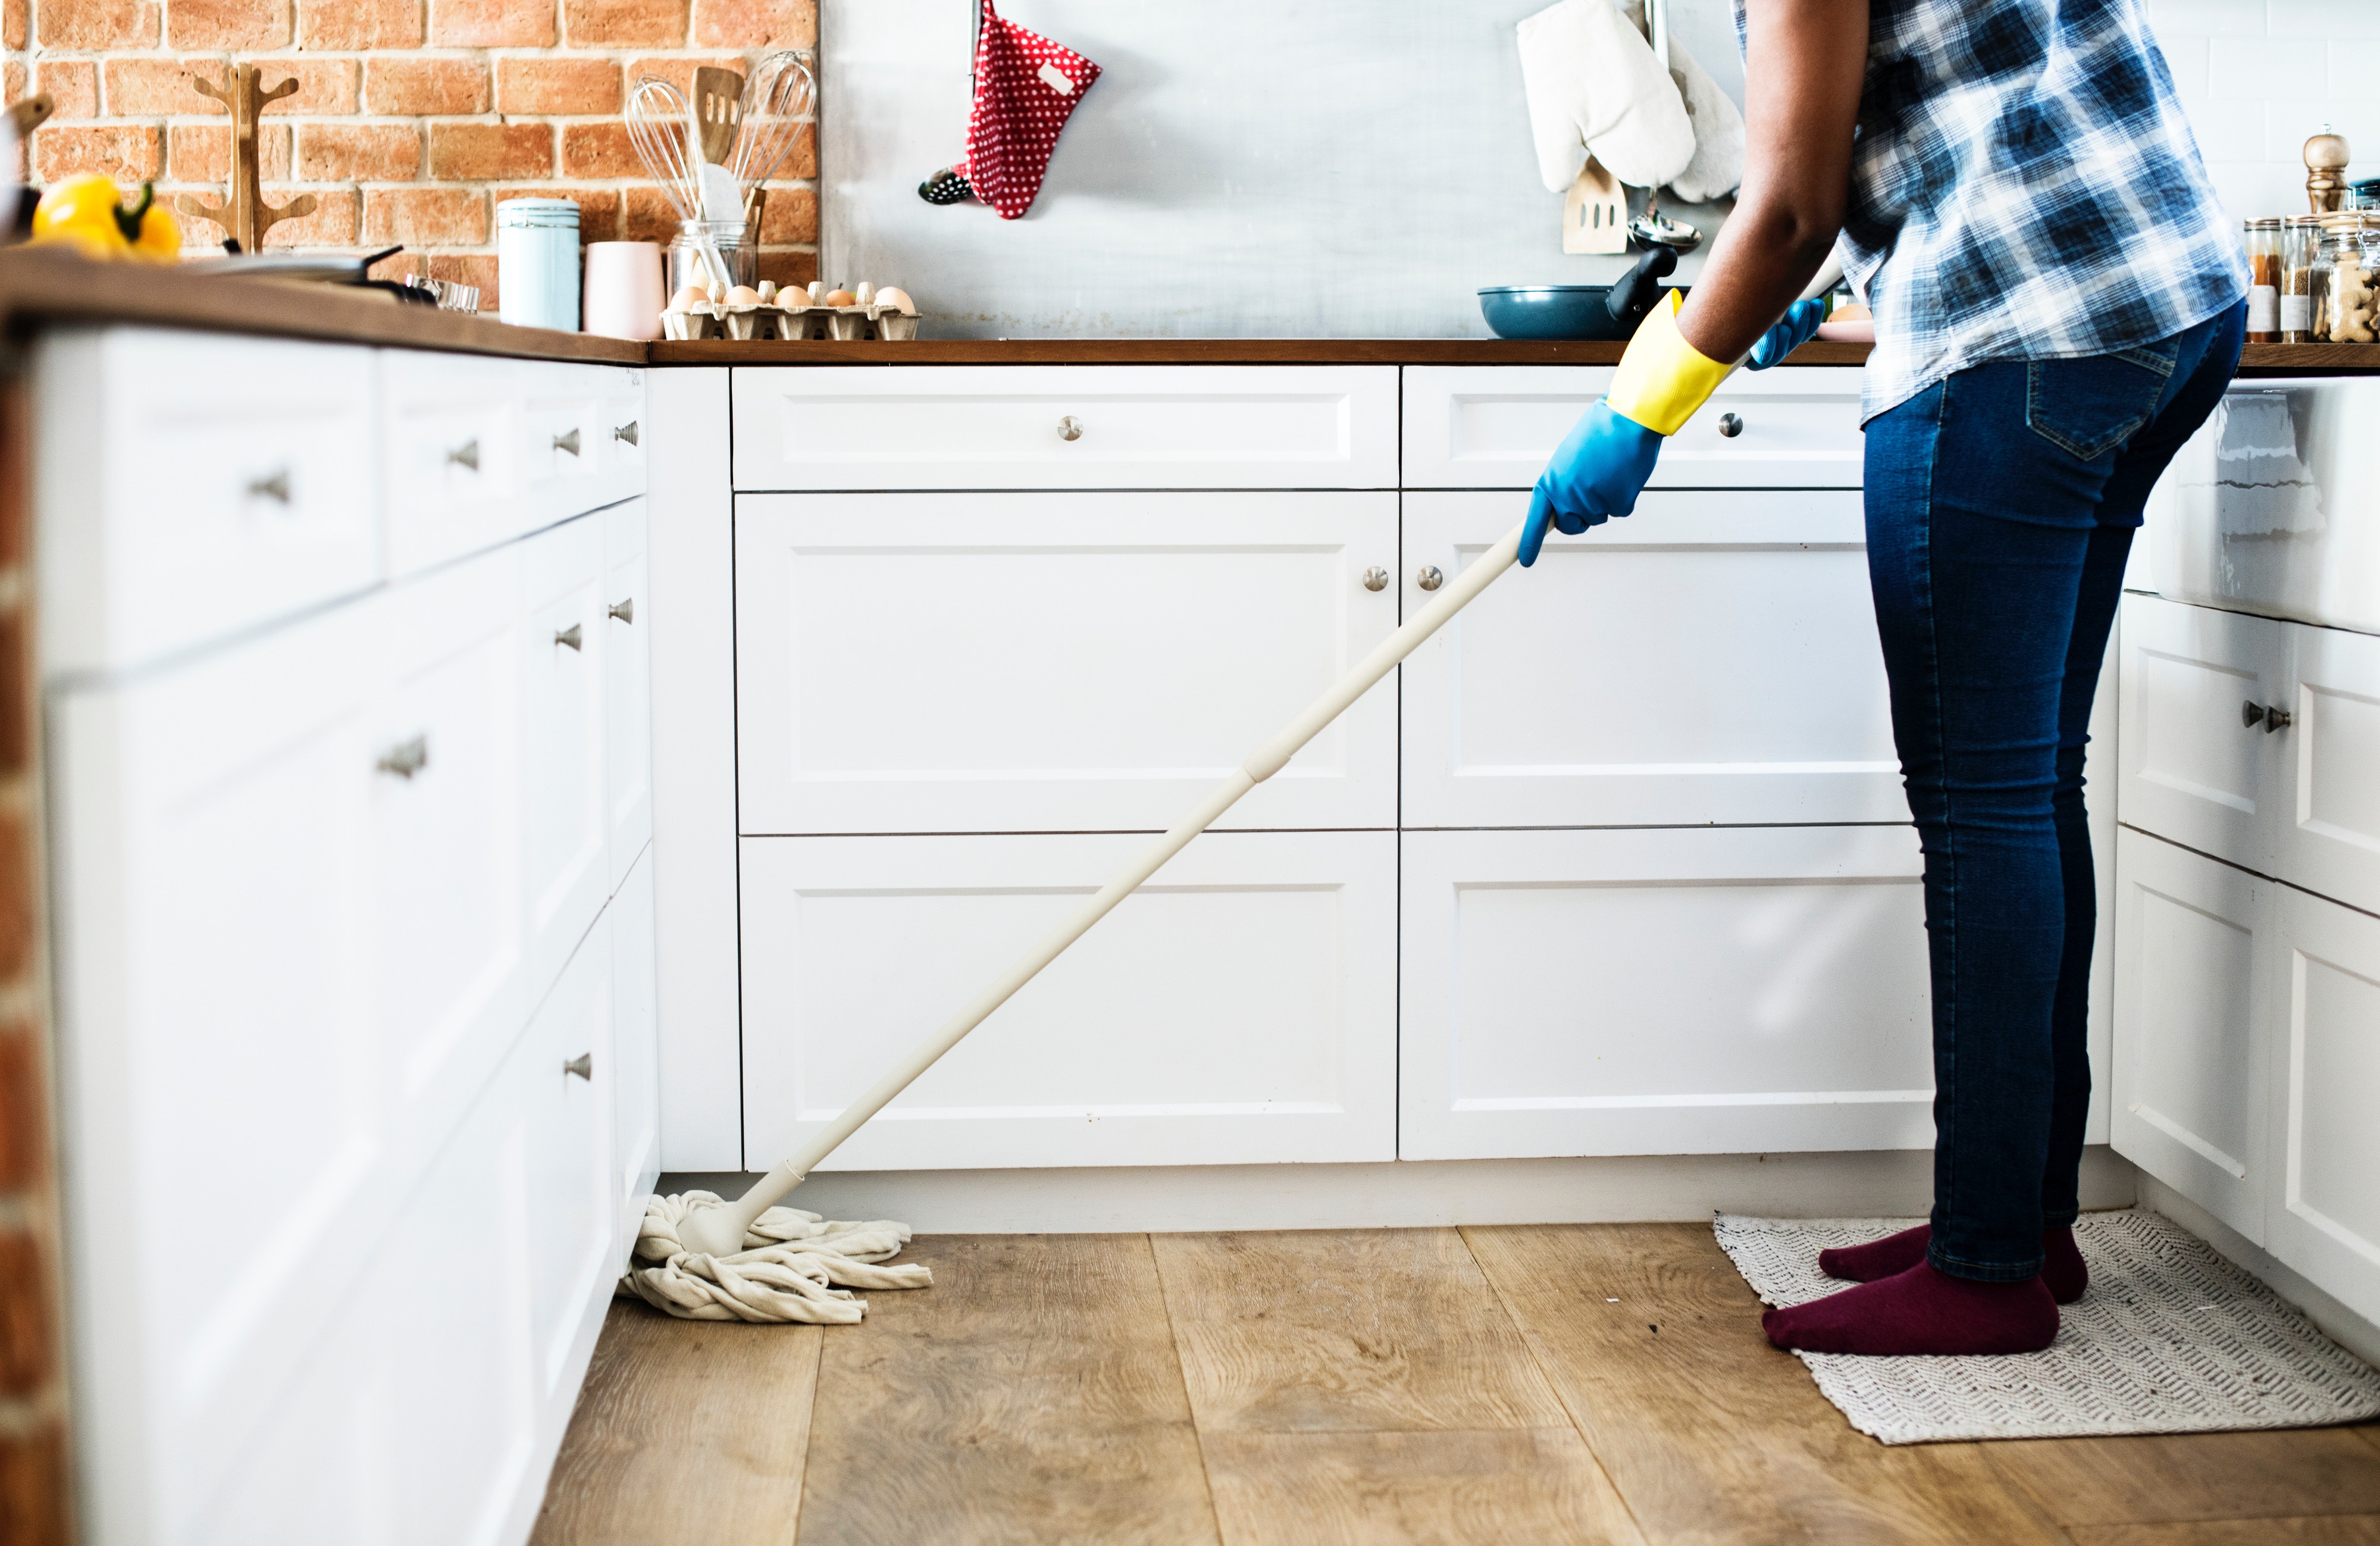 10 Reasons to Start Green Cleaning Your Home